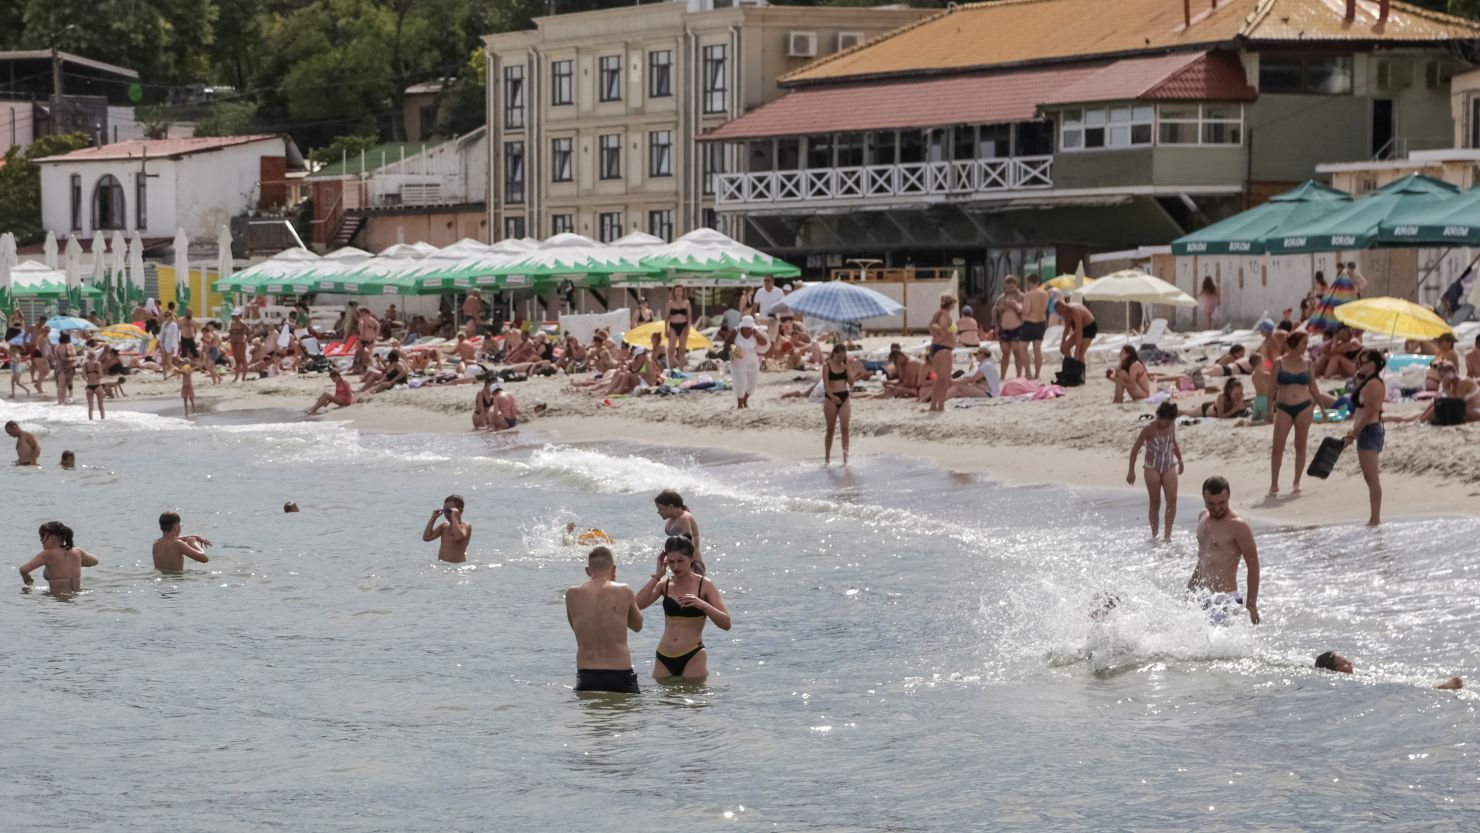 Odesa is famous for its beaches and was once a popular destination for both Ukrainians and Russians. 